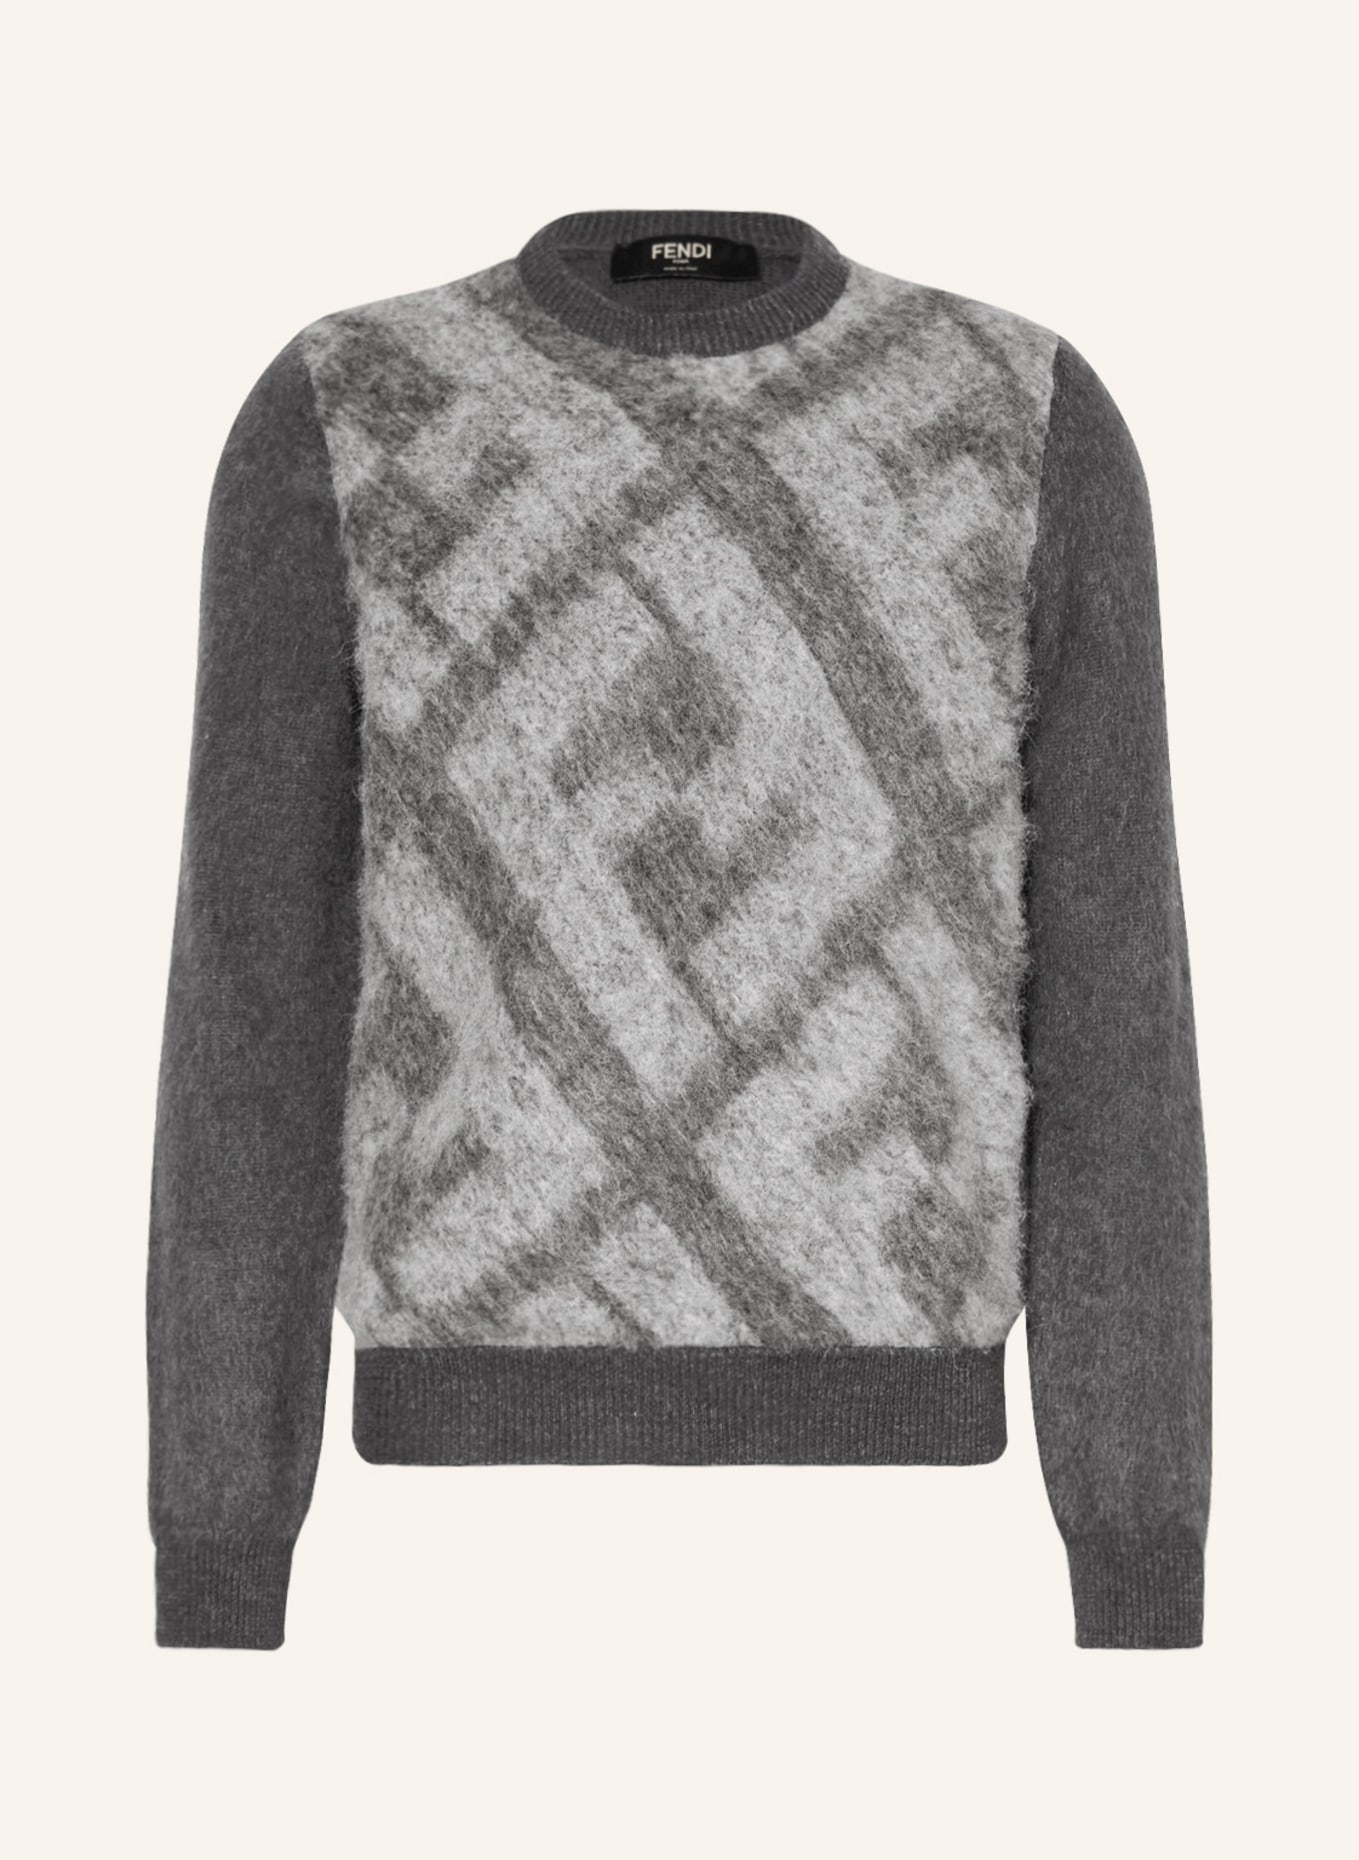 FENDI Sweater with mohair, Color: GRAY/ LIGHT GRAY (Image 1)